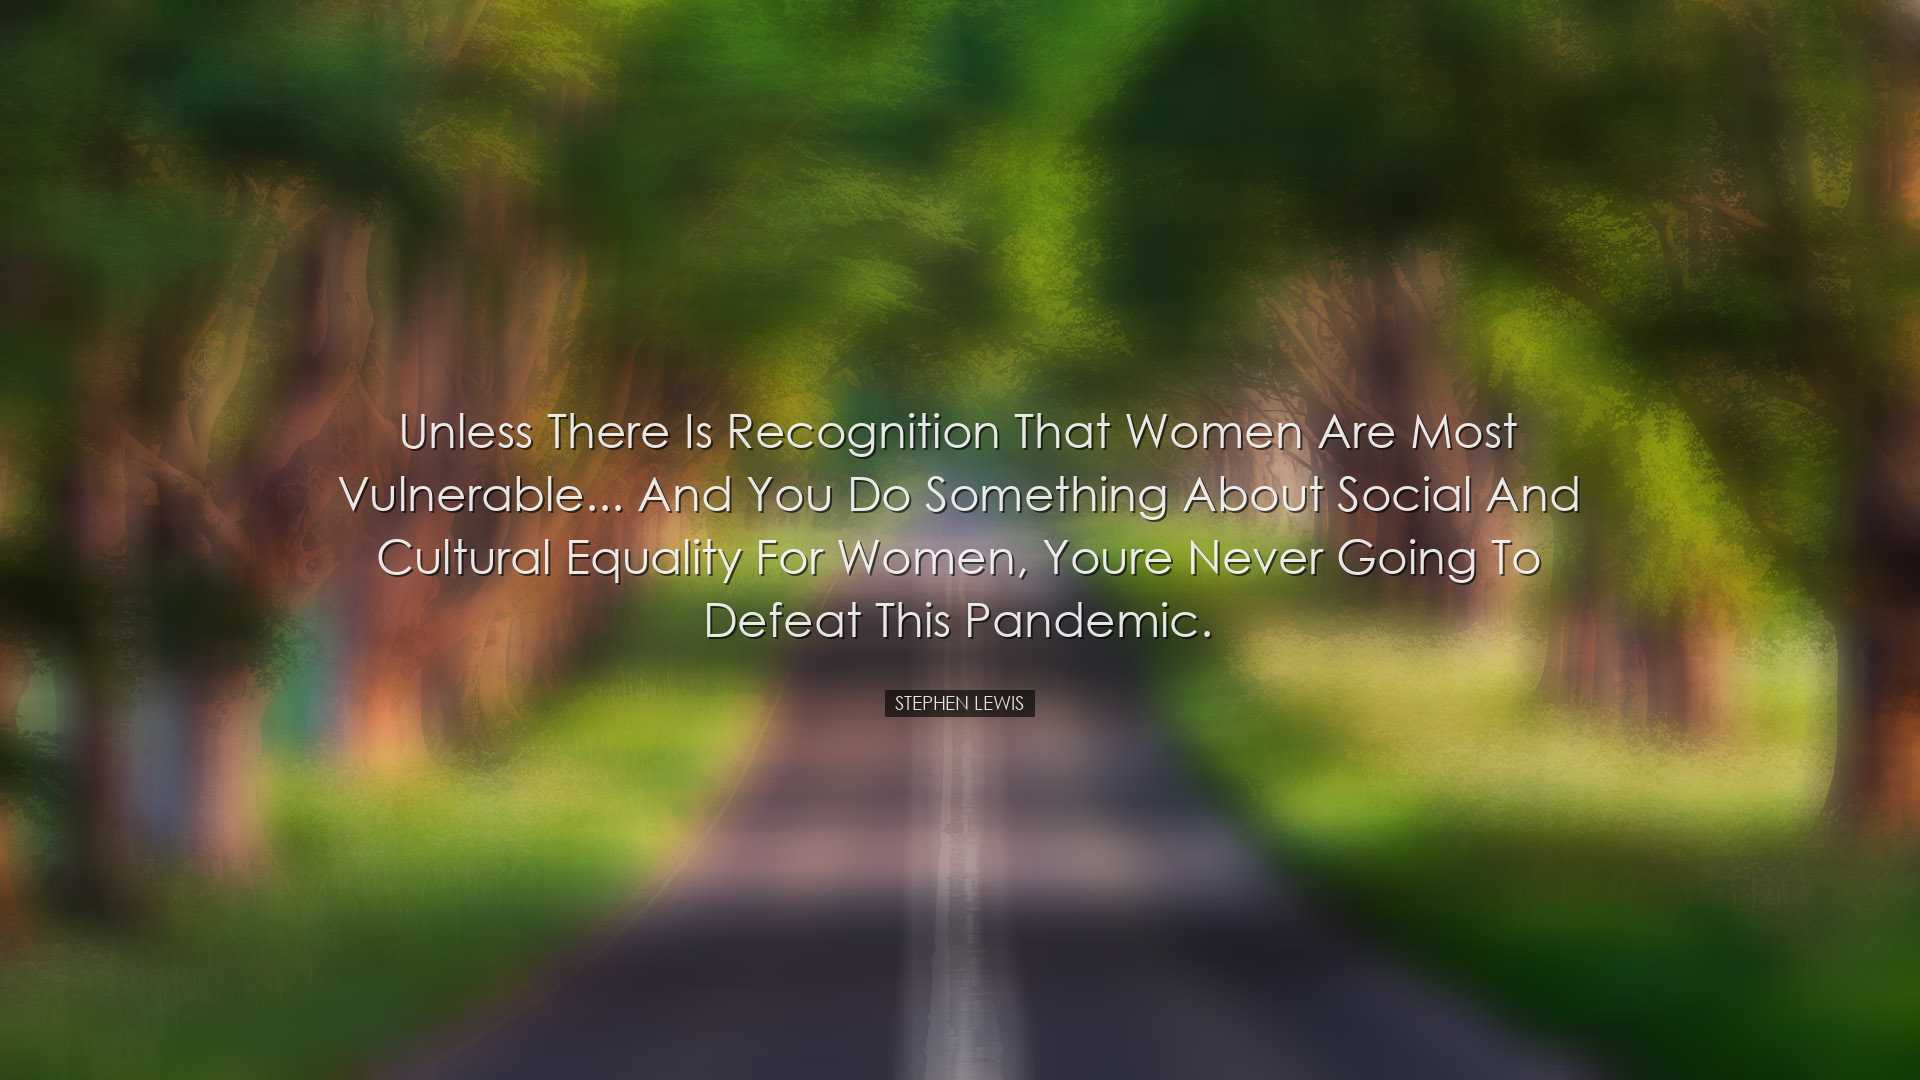 Unless there is recognition that women are most vulnerable... and